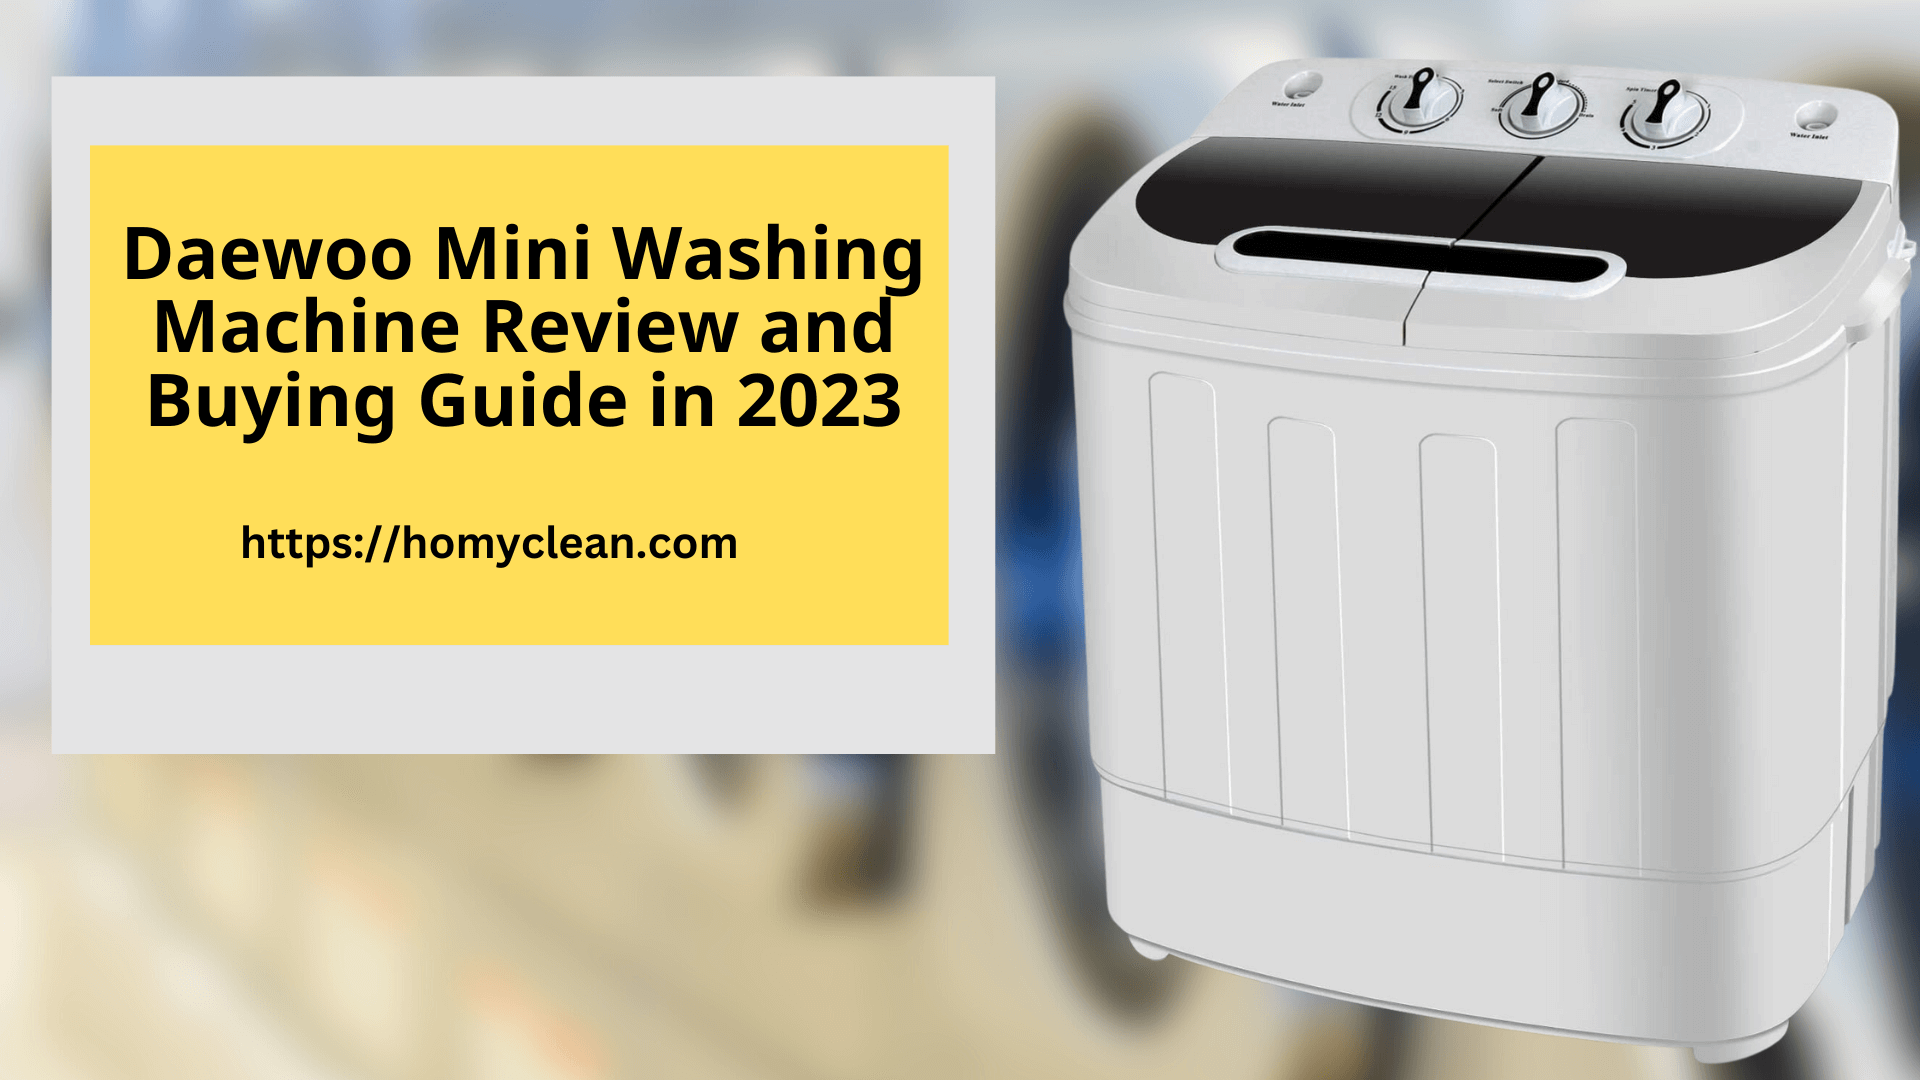 Daewoo Mini Washing Machine Review: The Perfect Solution for Small Living Spaces